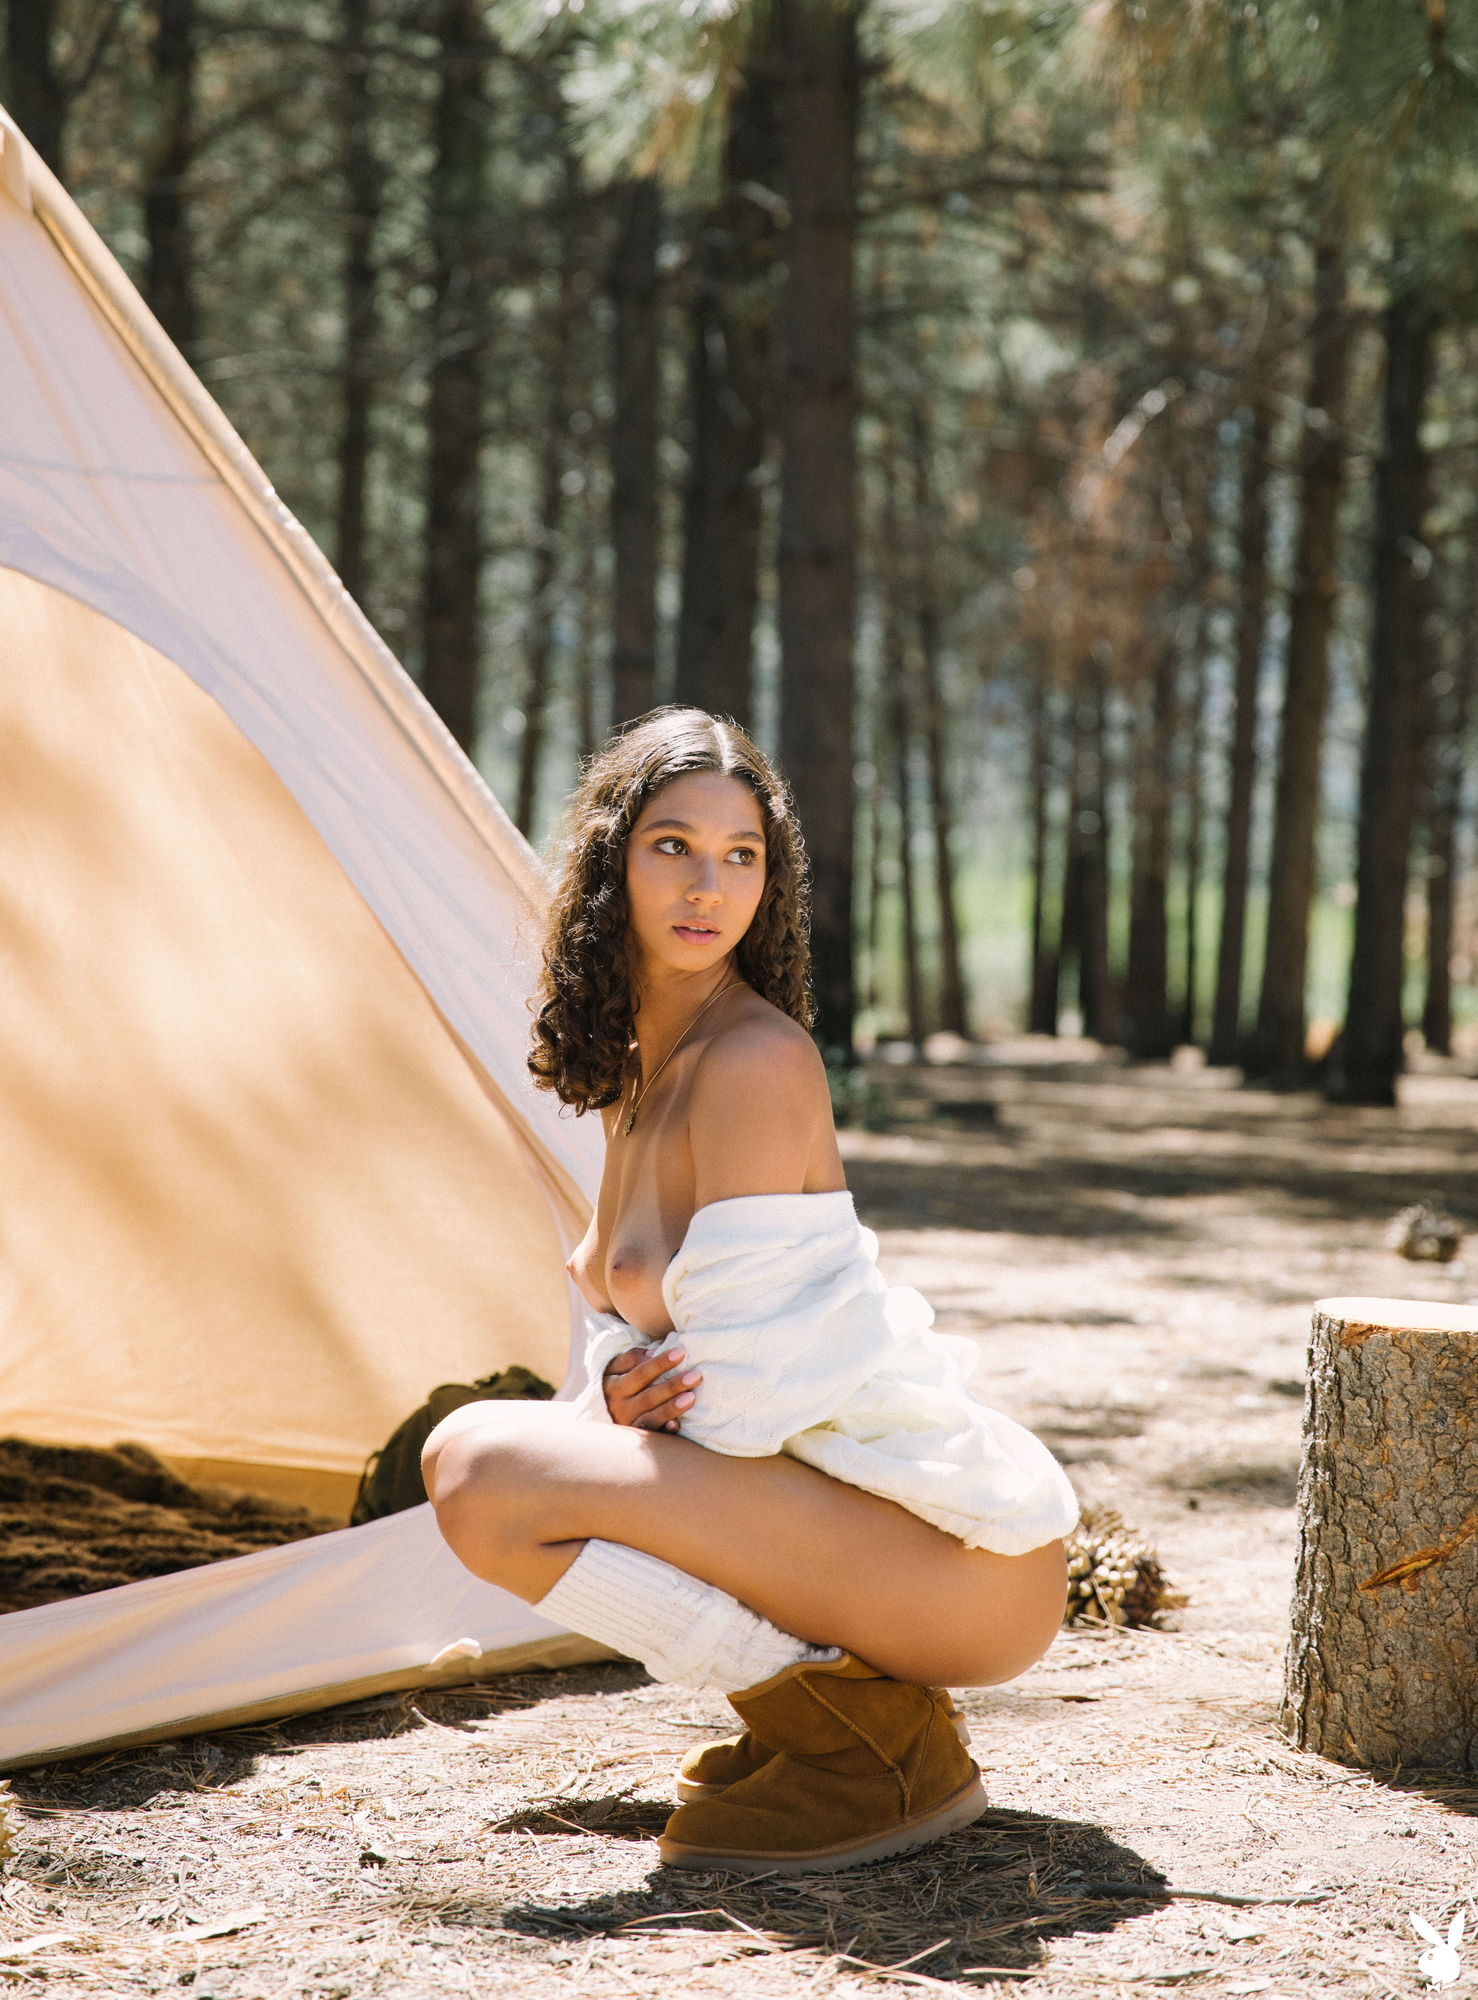 maia-serena-tranquil-setting-naked-brunette-tent-woods-playboy-19